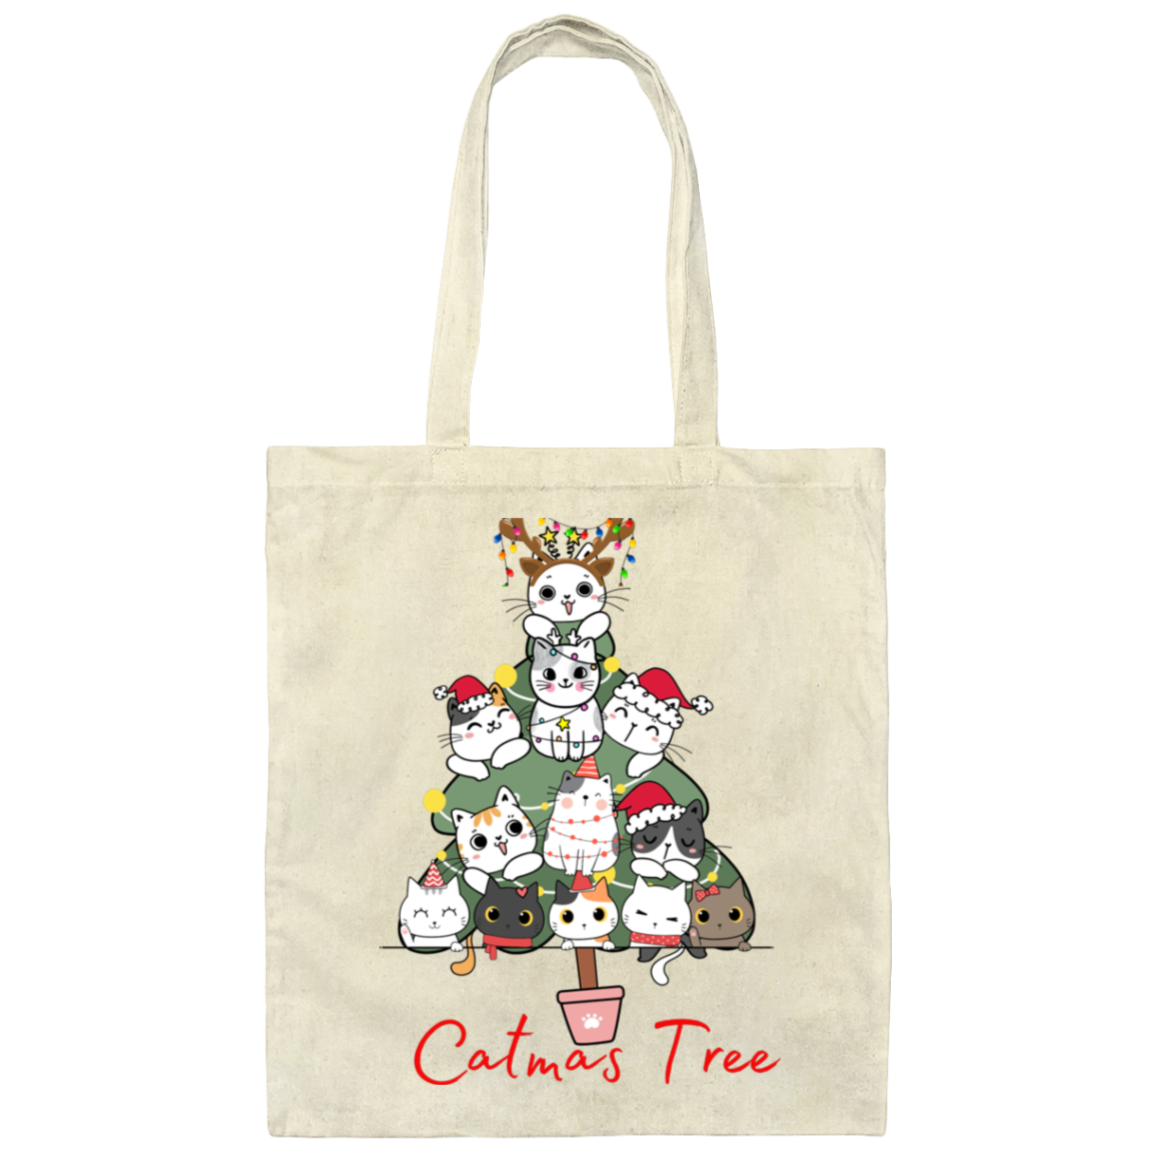 CatMas Tree for Crazy Cat Lady -Canvas Tote Bag